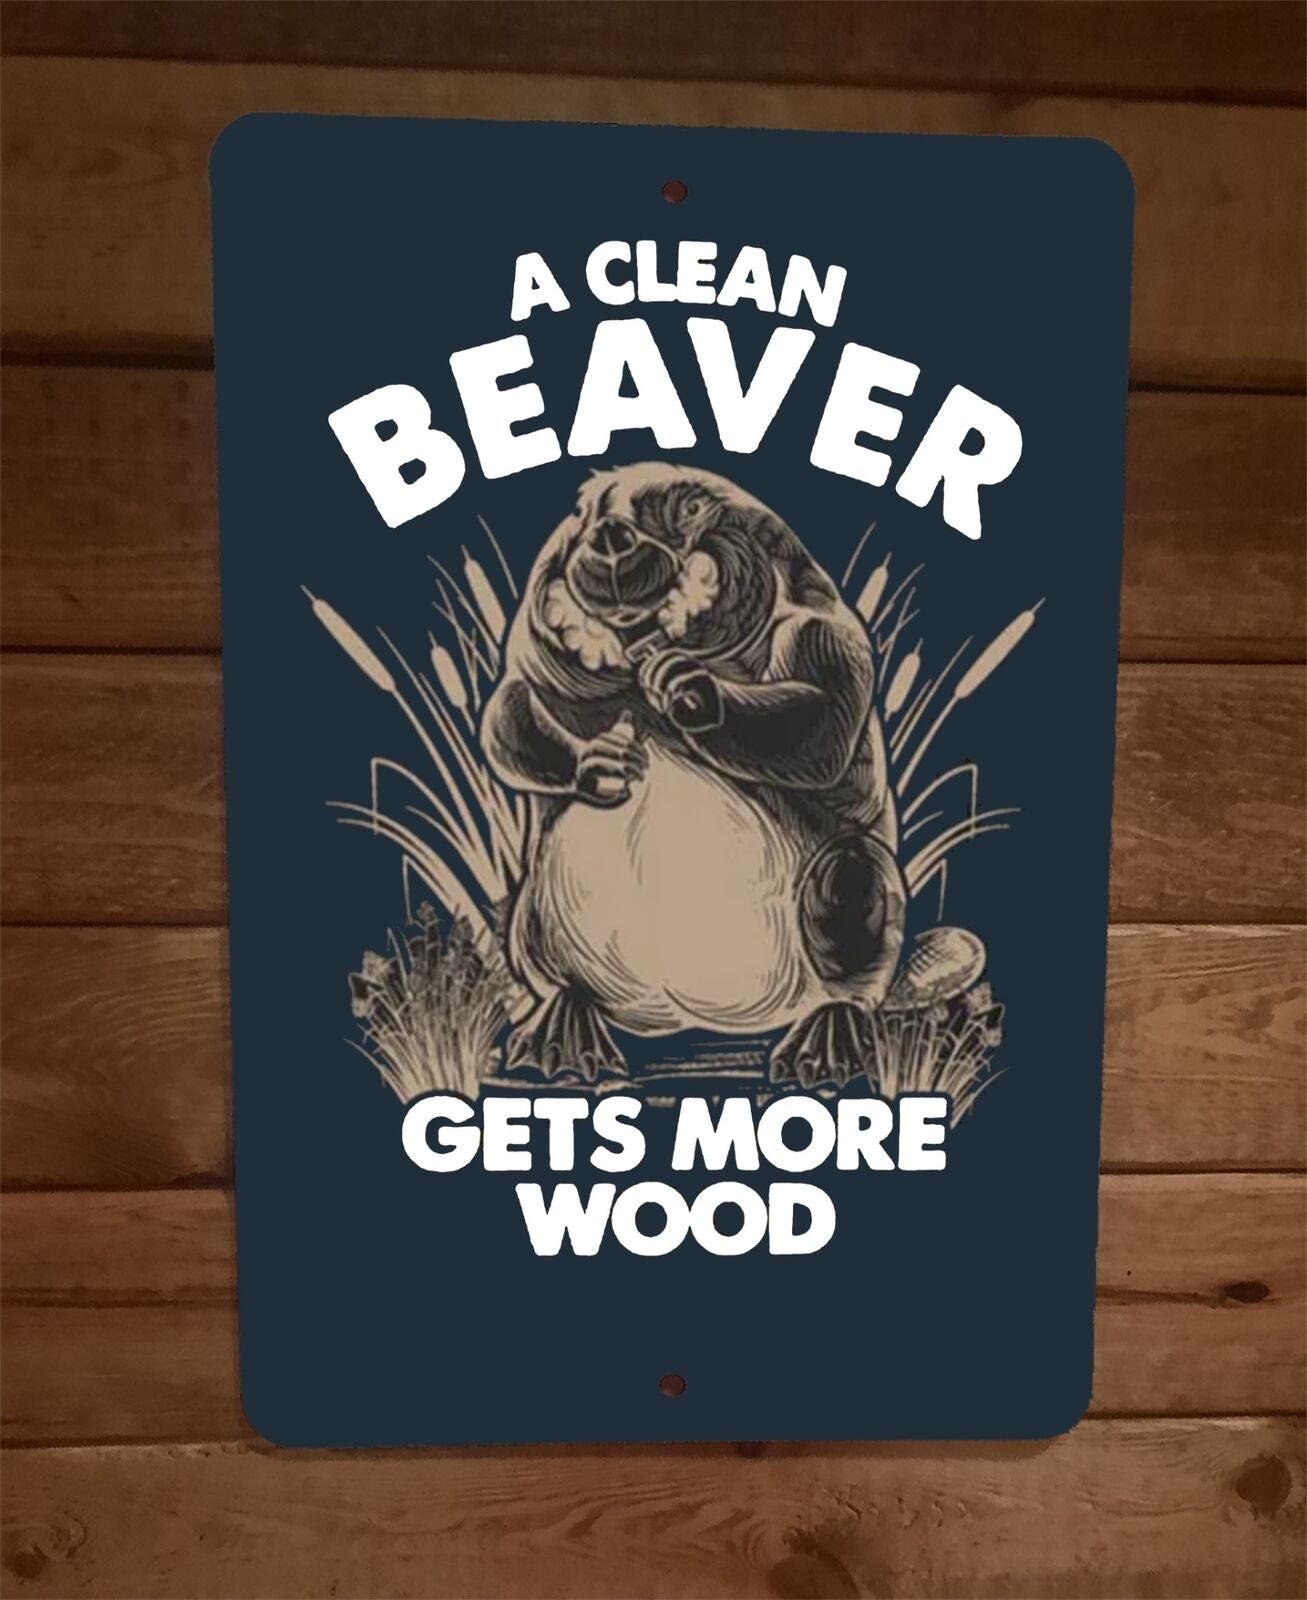 A Clean Beaver Gets More Wood 8x12 Metal Wall Animal Sign